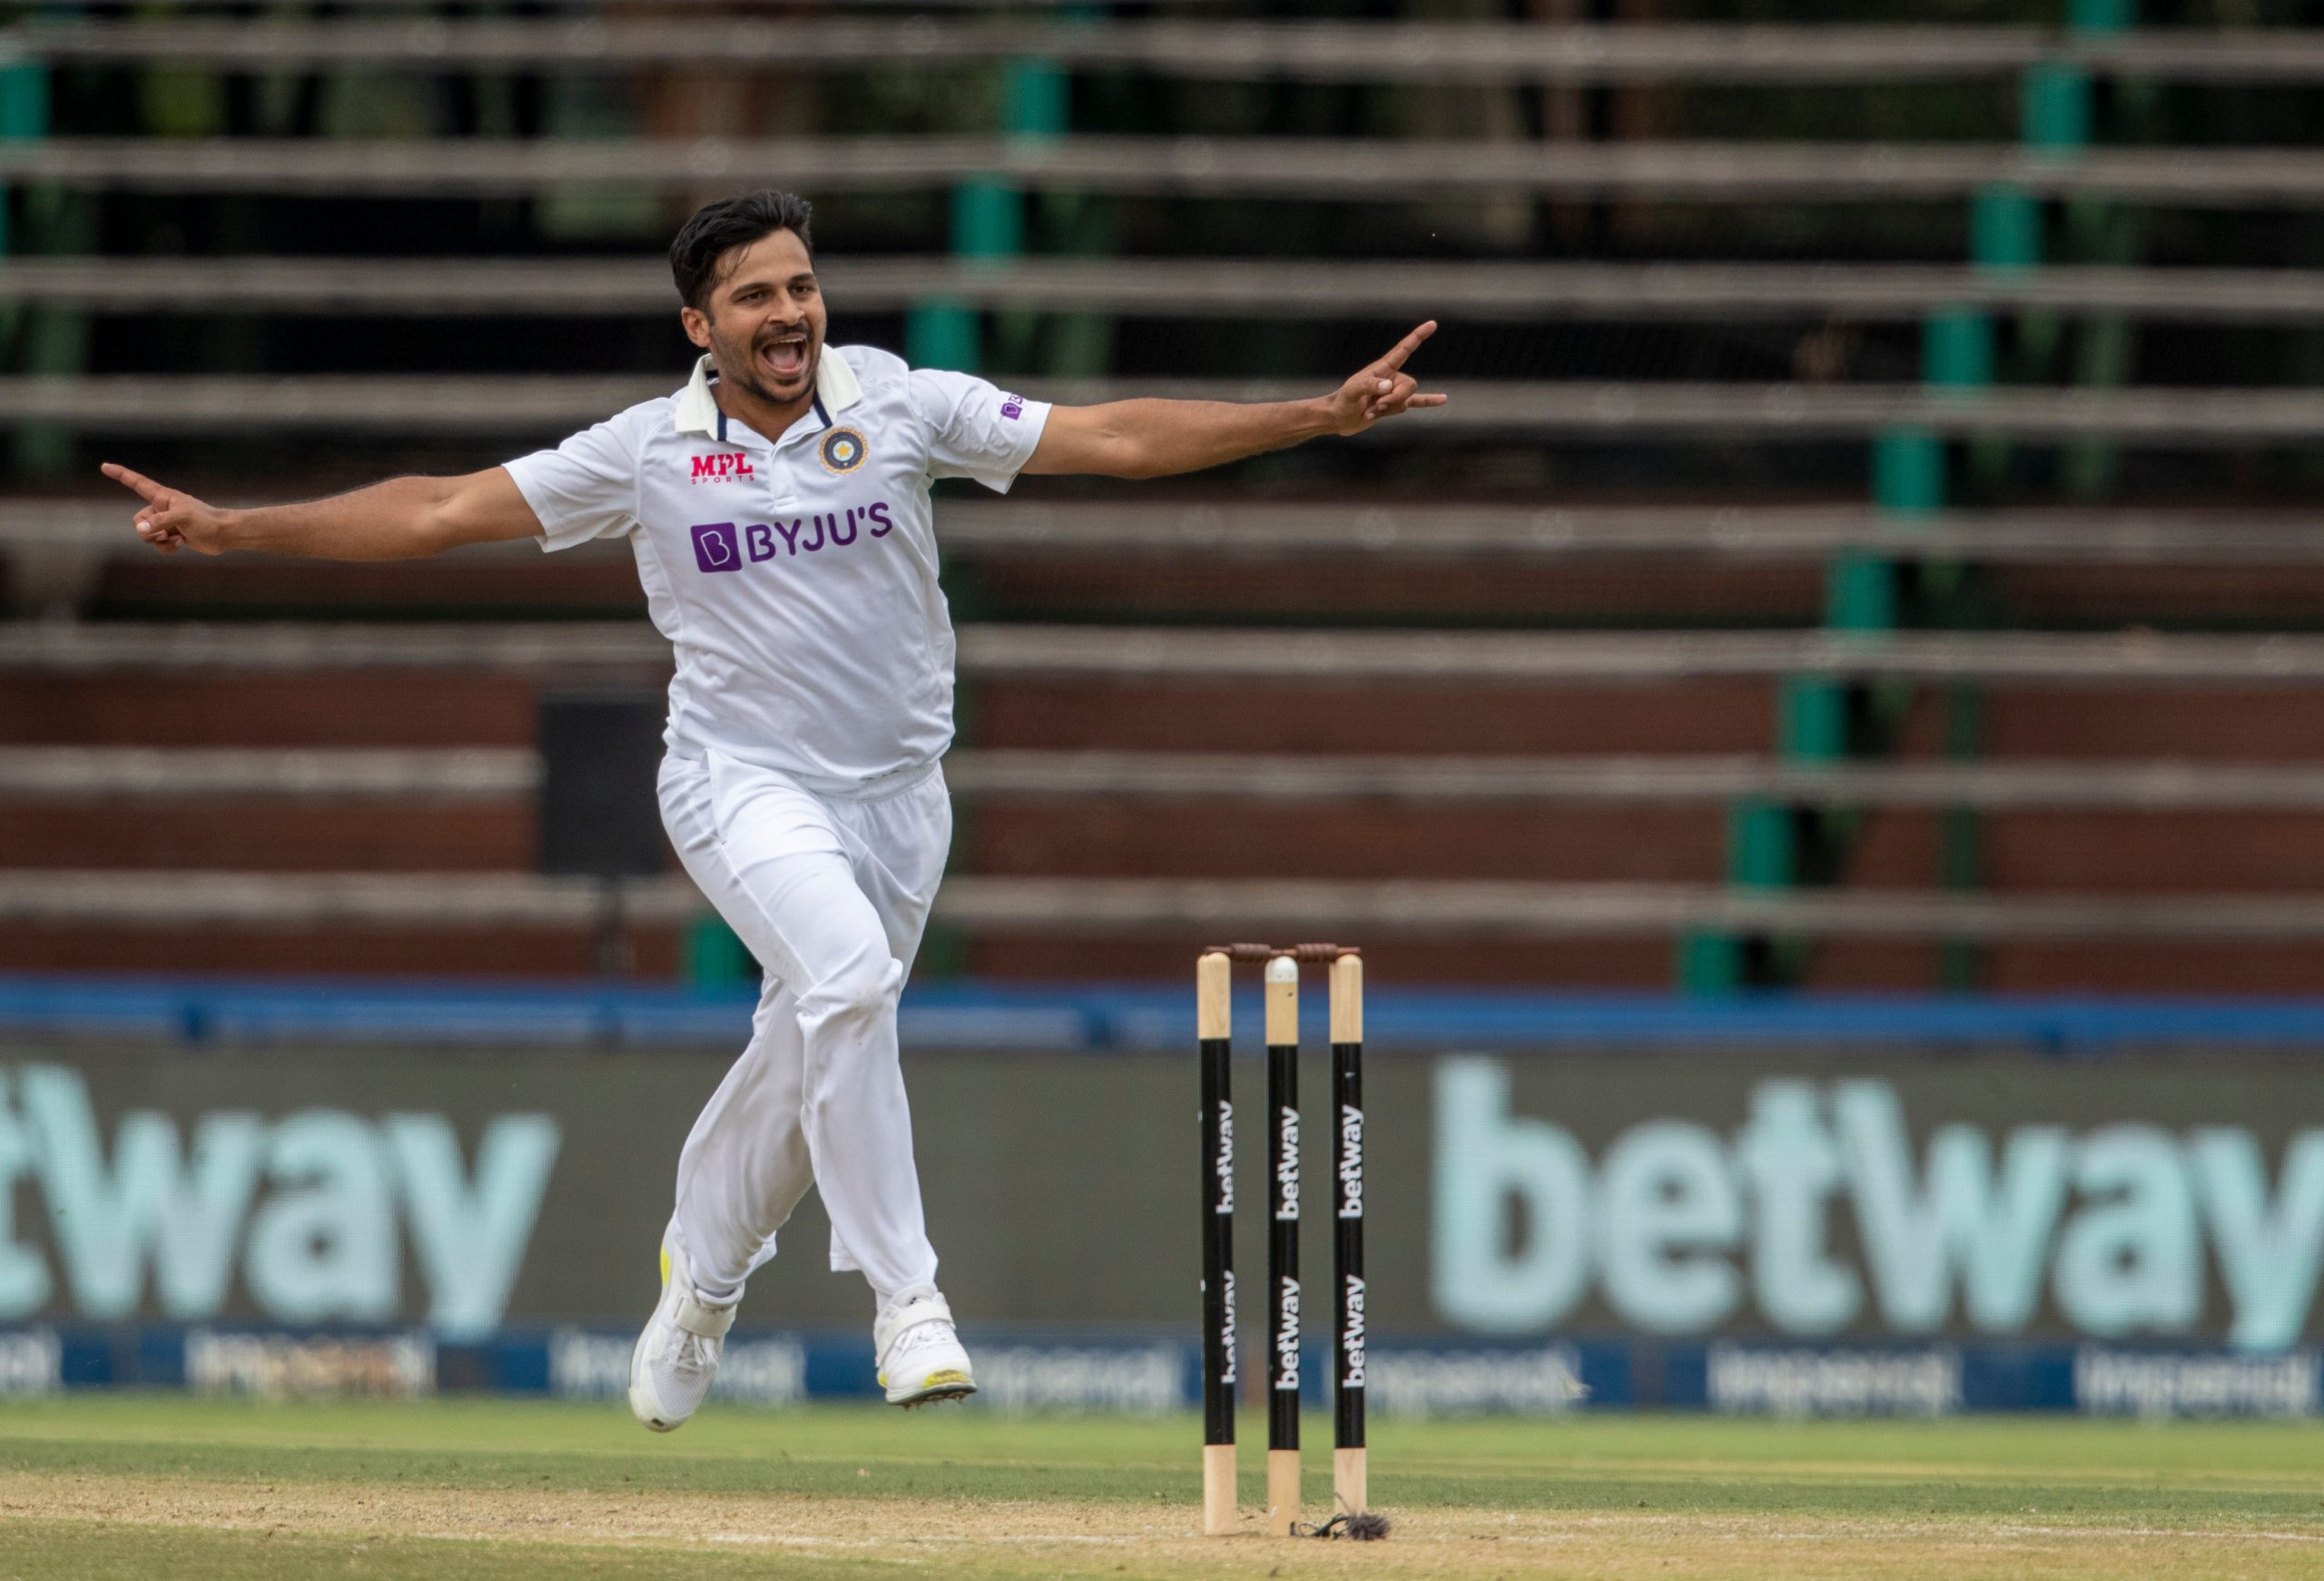 Watch: Shardul Thakur gives Marco Jansen a taste of his own medicine, a nasty bouncer on chest